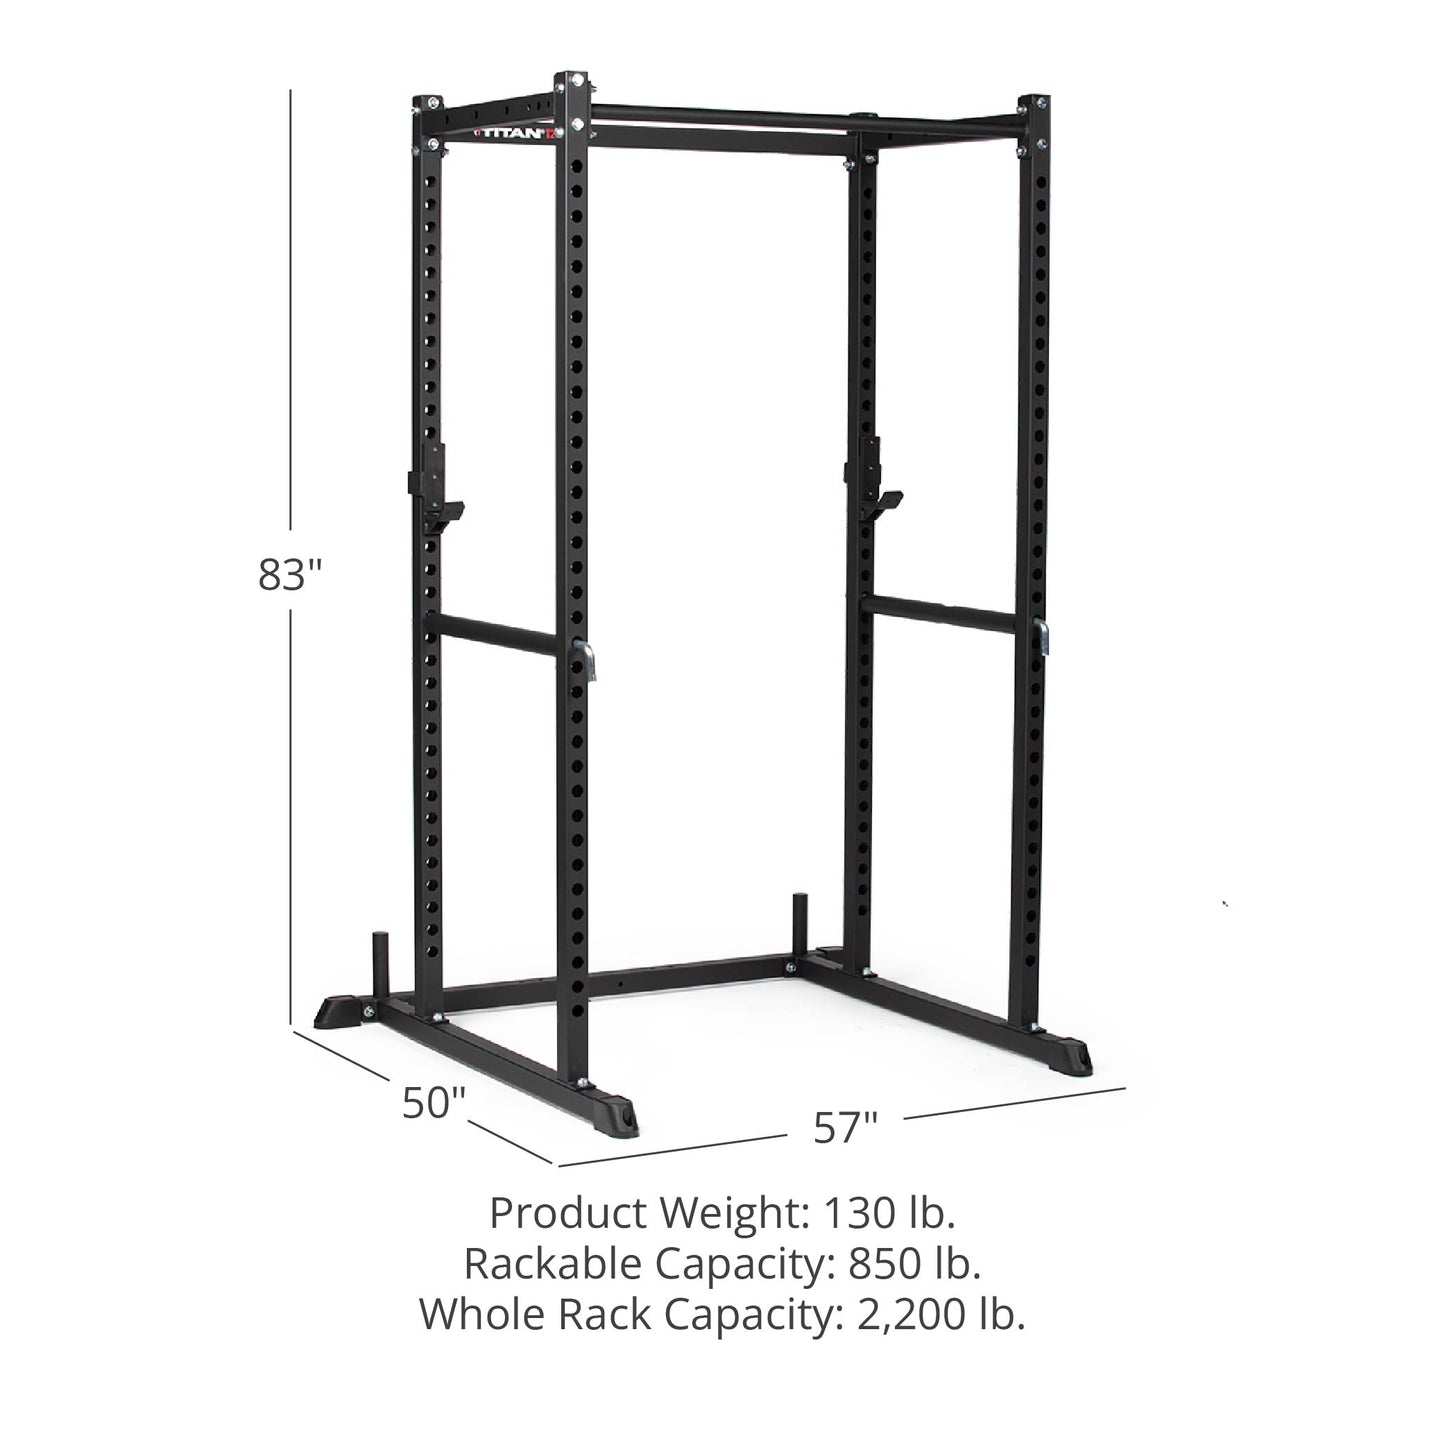 T-2 Series Power Rack | Image Shows Height of 83", Length of 50", Width of 57". Product Weight: 130 lb. Rackable Capacity: 850 lb. Whole Rack Capacity: 2,200 lb. - view 24